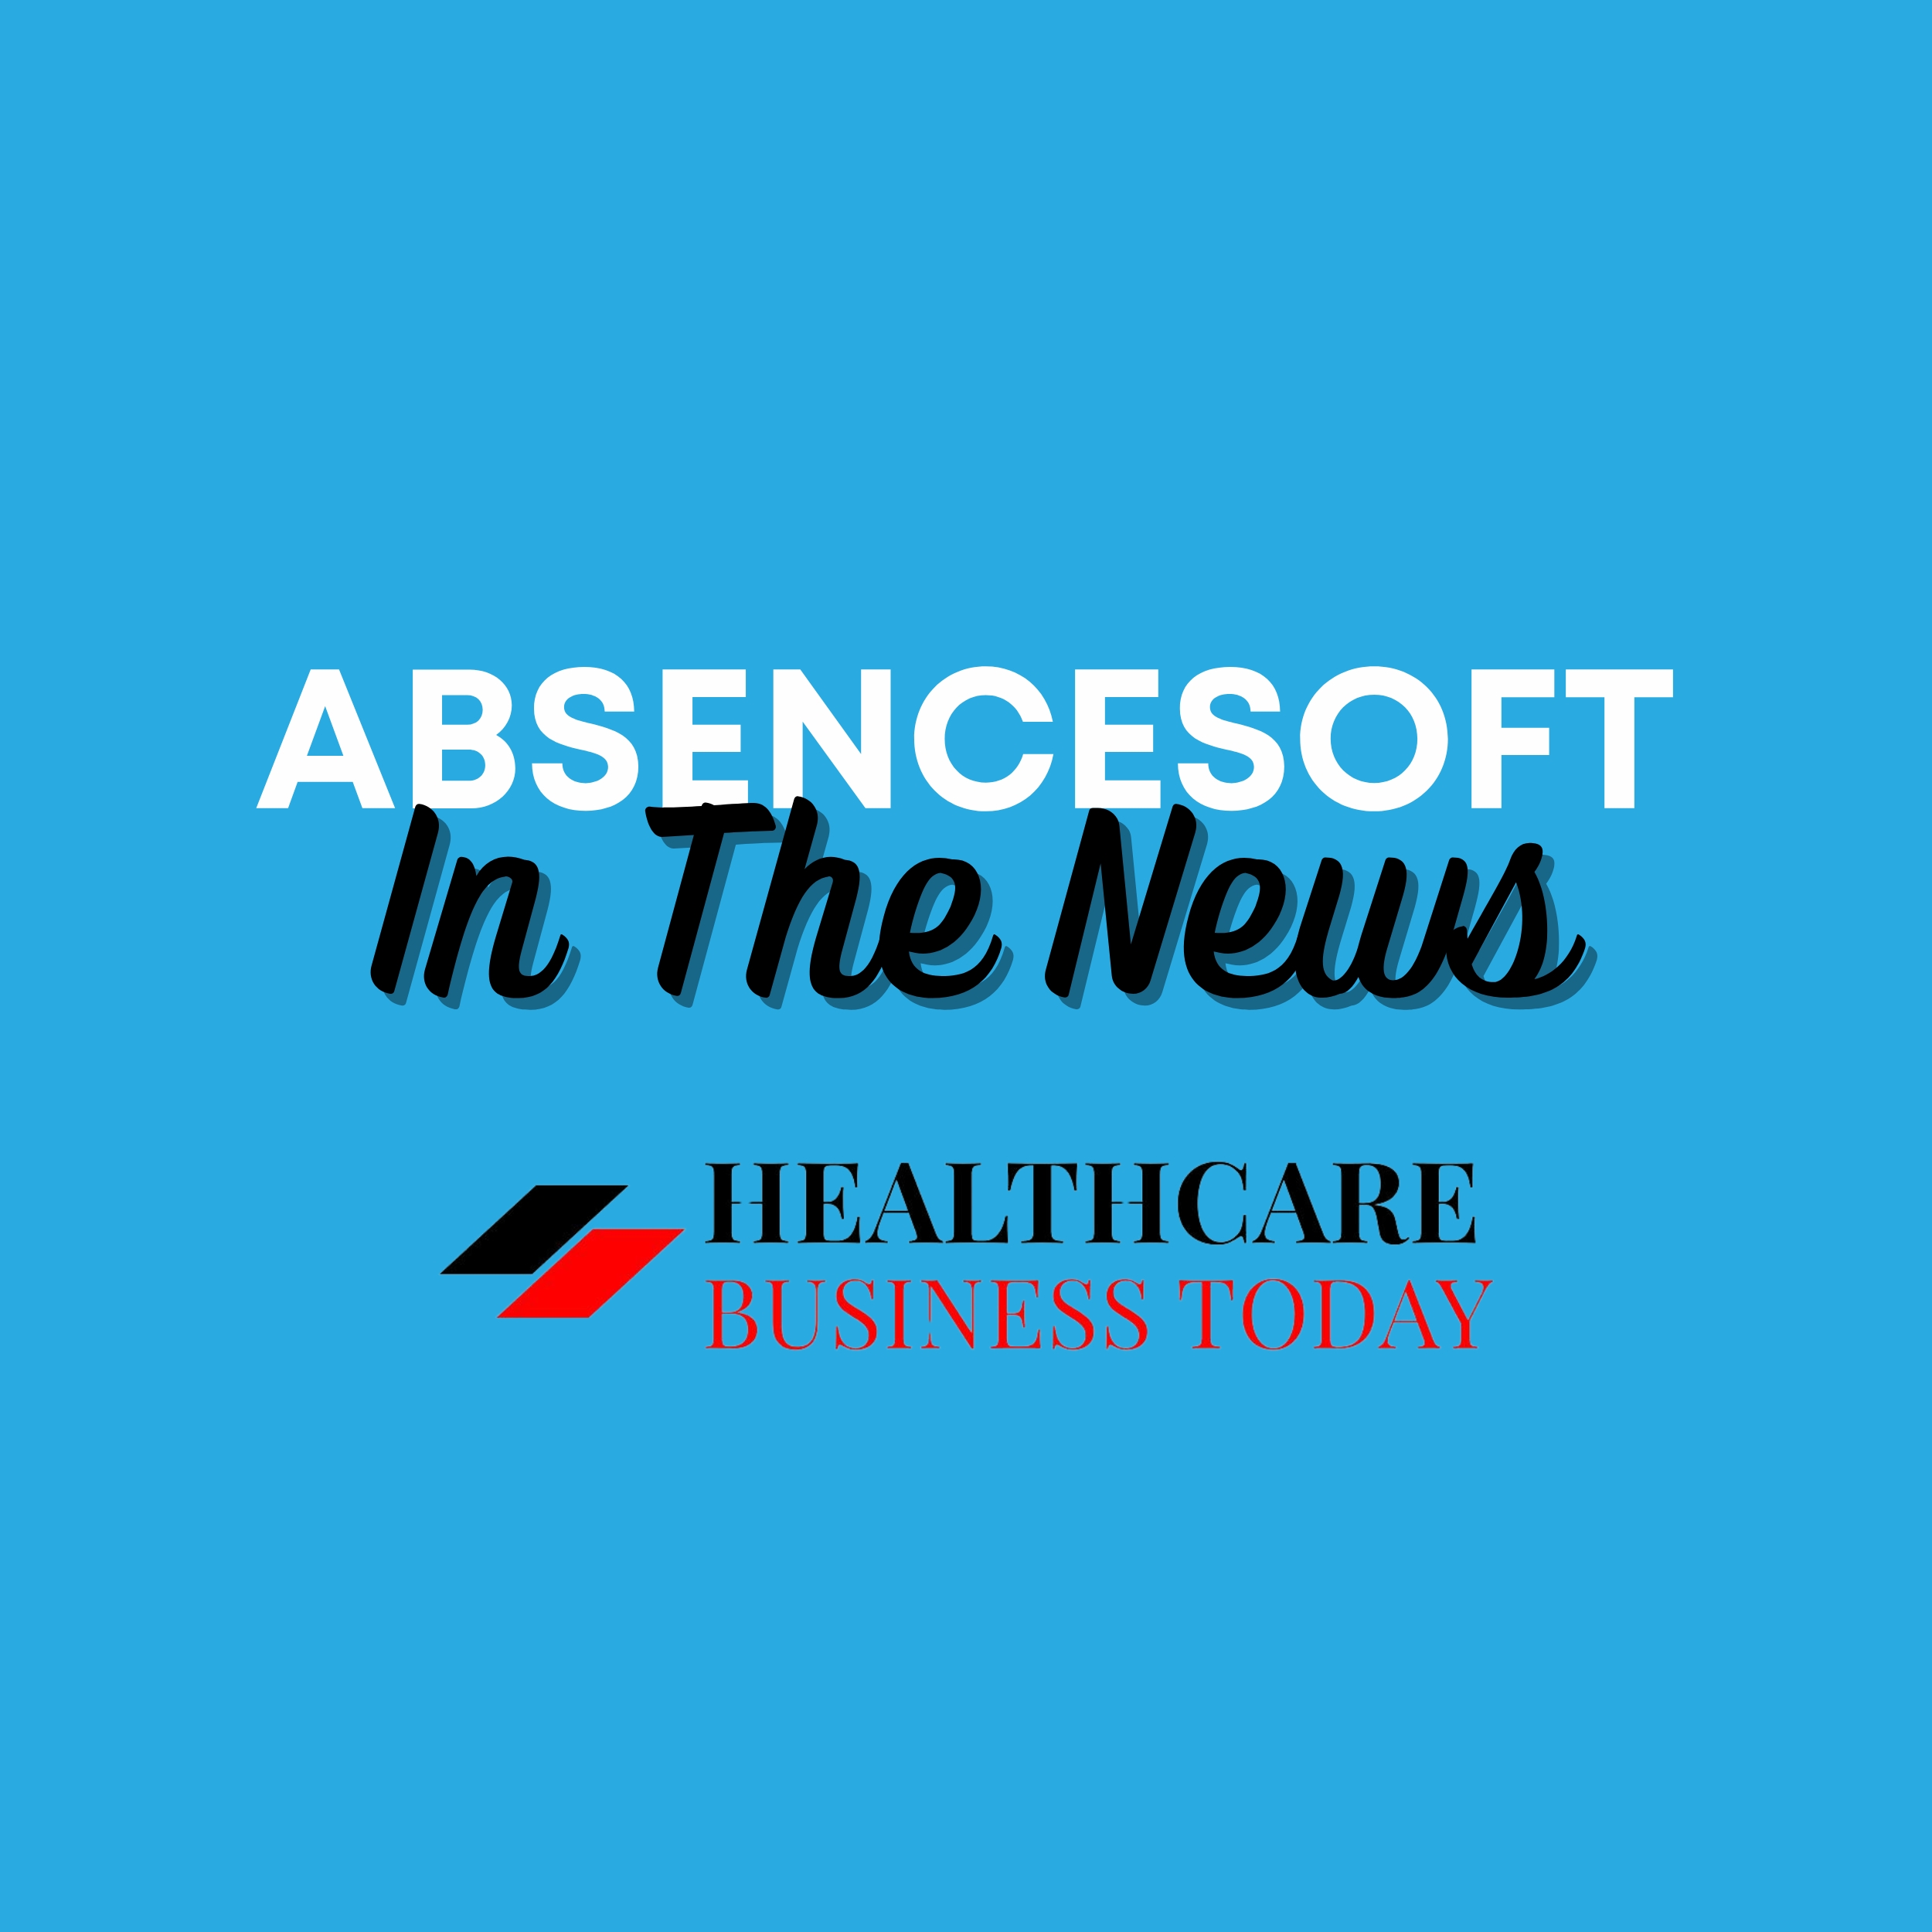 AbsenceSoft In The News Healthcare Business Today